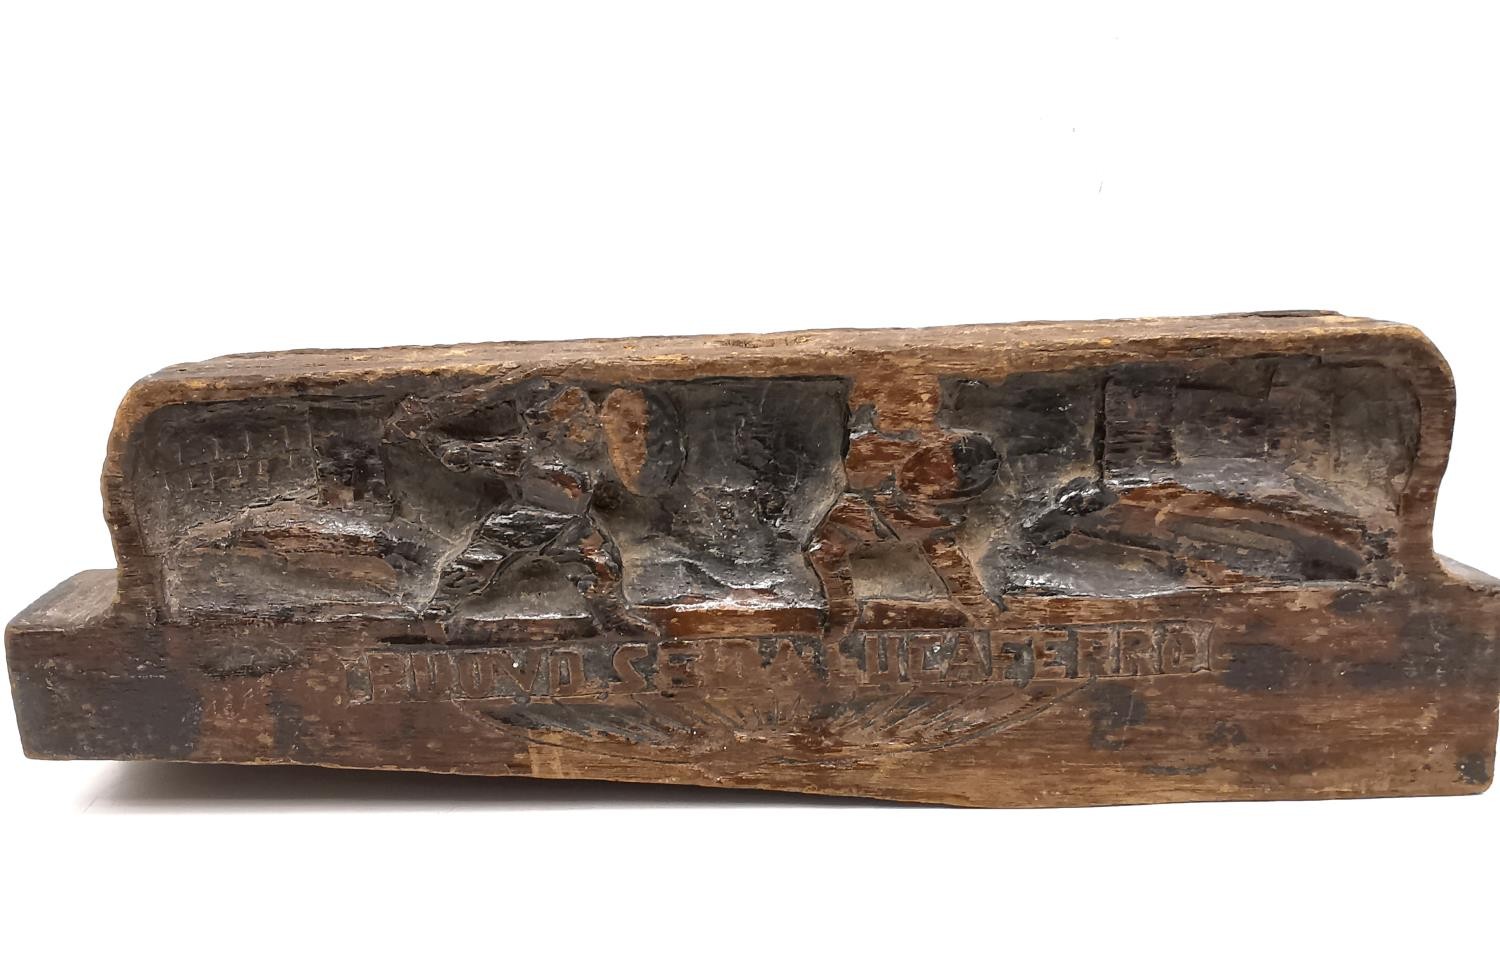 A 19th century decorative Italian wood carving possibly a small lintel or Sicilian cart fragment. - Image 2 of 7